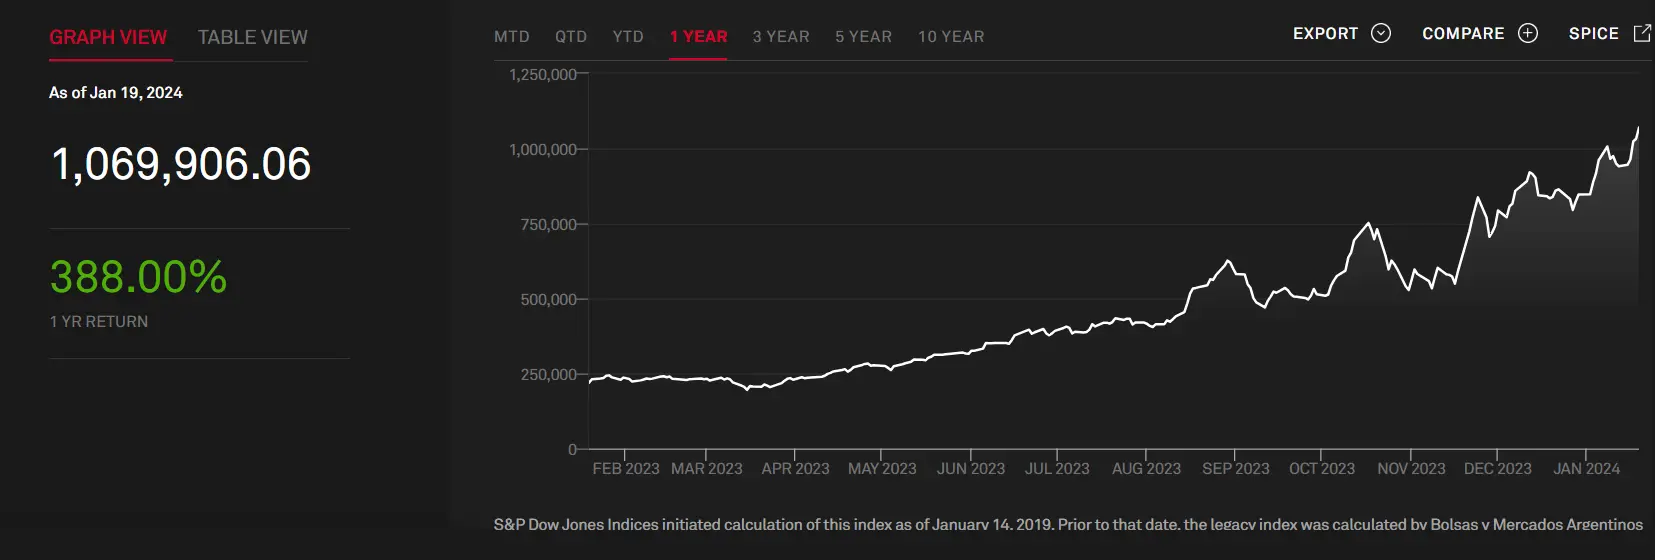 Record Highs in Argentina's Stock Market Following Election. (Phto Internet reproduction)